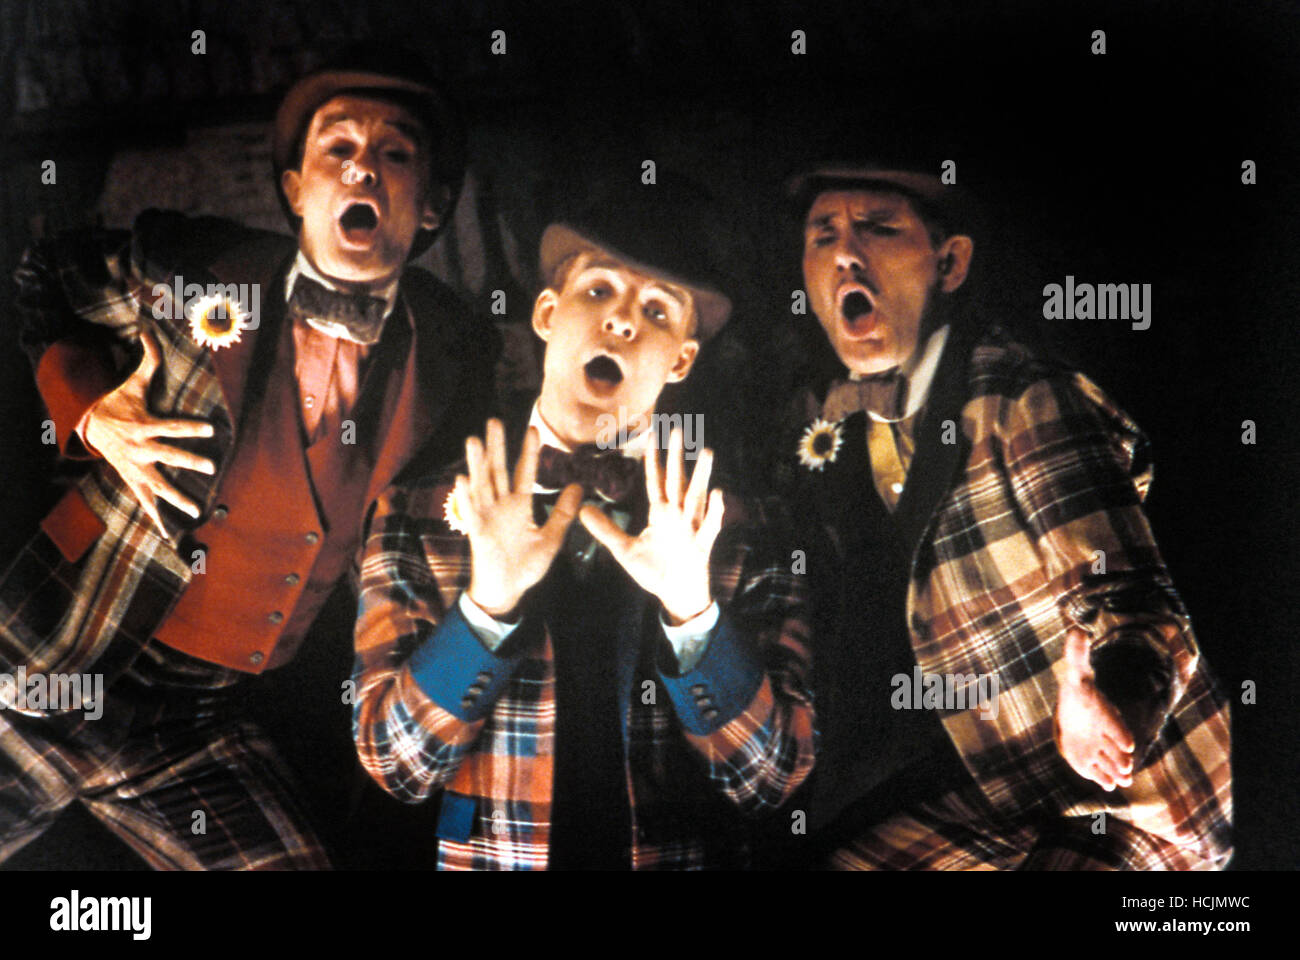 PENNIES FROM HEAVEN, Robert Fitch, Steve Martin, Tommy Rall, 1981, (c) MGM/courtesy Everett Collection Stock Photo